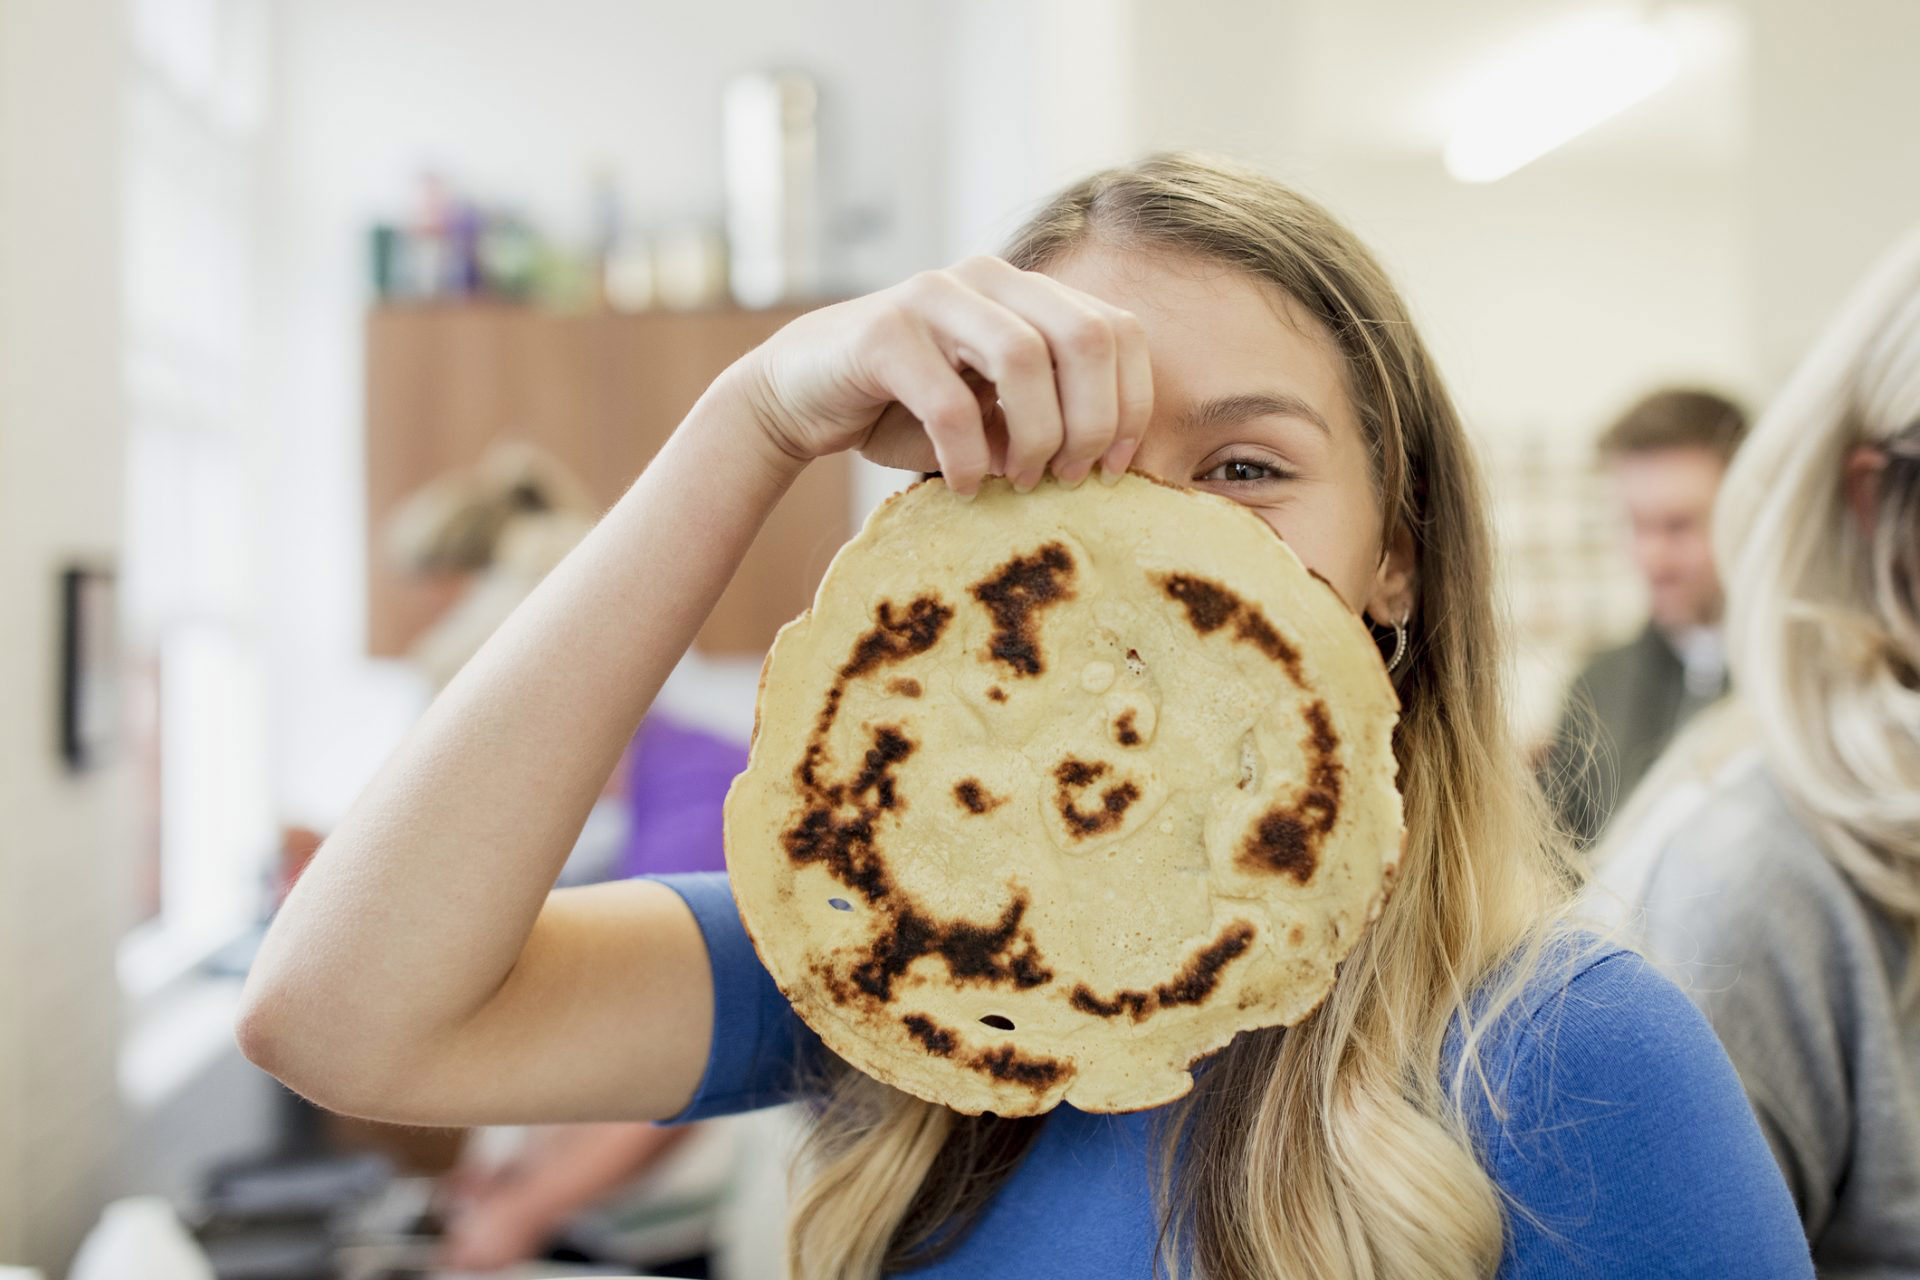 Delicious pancake recipes from around the world